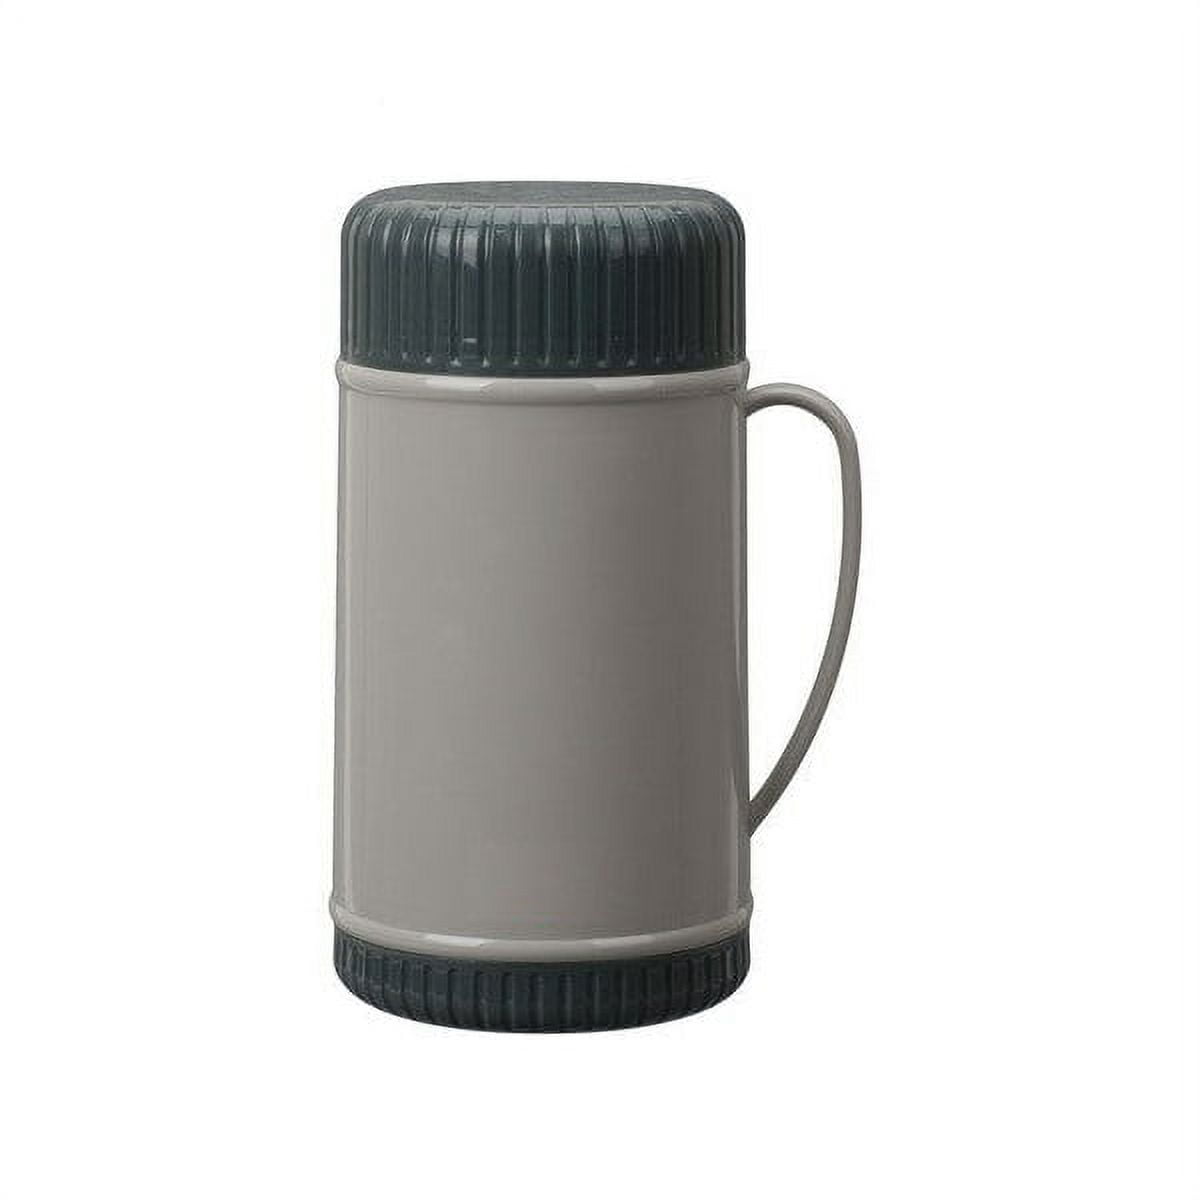 Soup Thermos for Hot Food,61oz 3 Tier Adults Wide Mouth Insulated